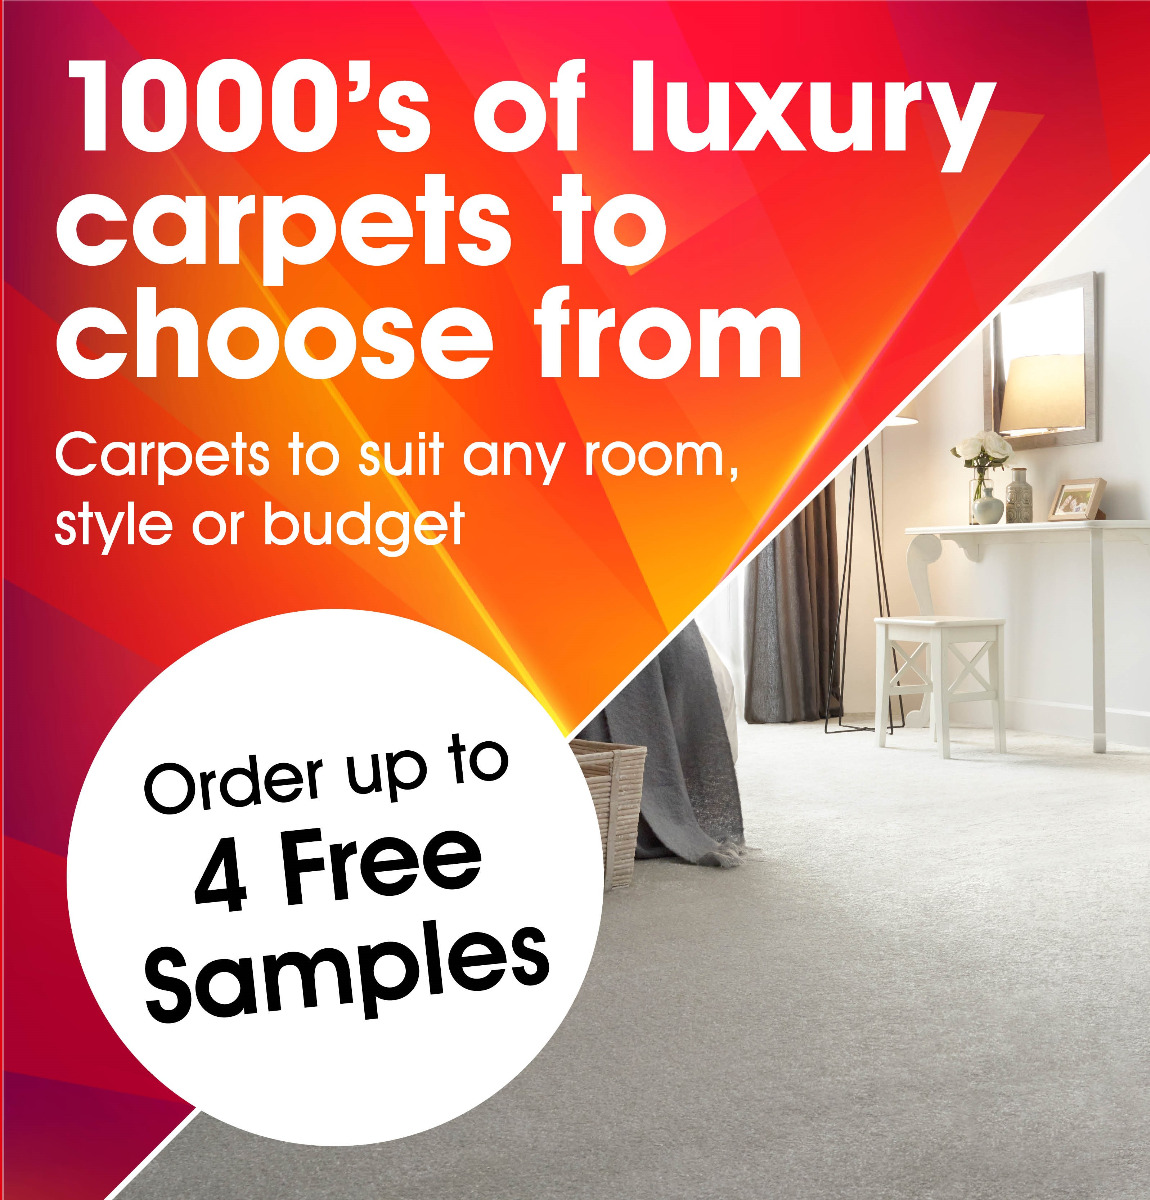 United Carpets and Beds - Carpets On Sale